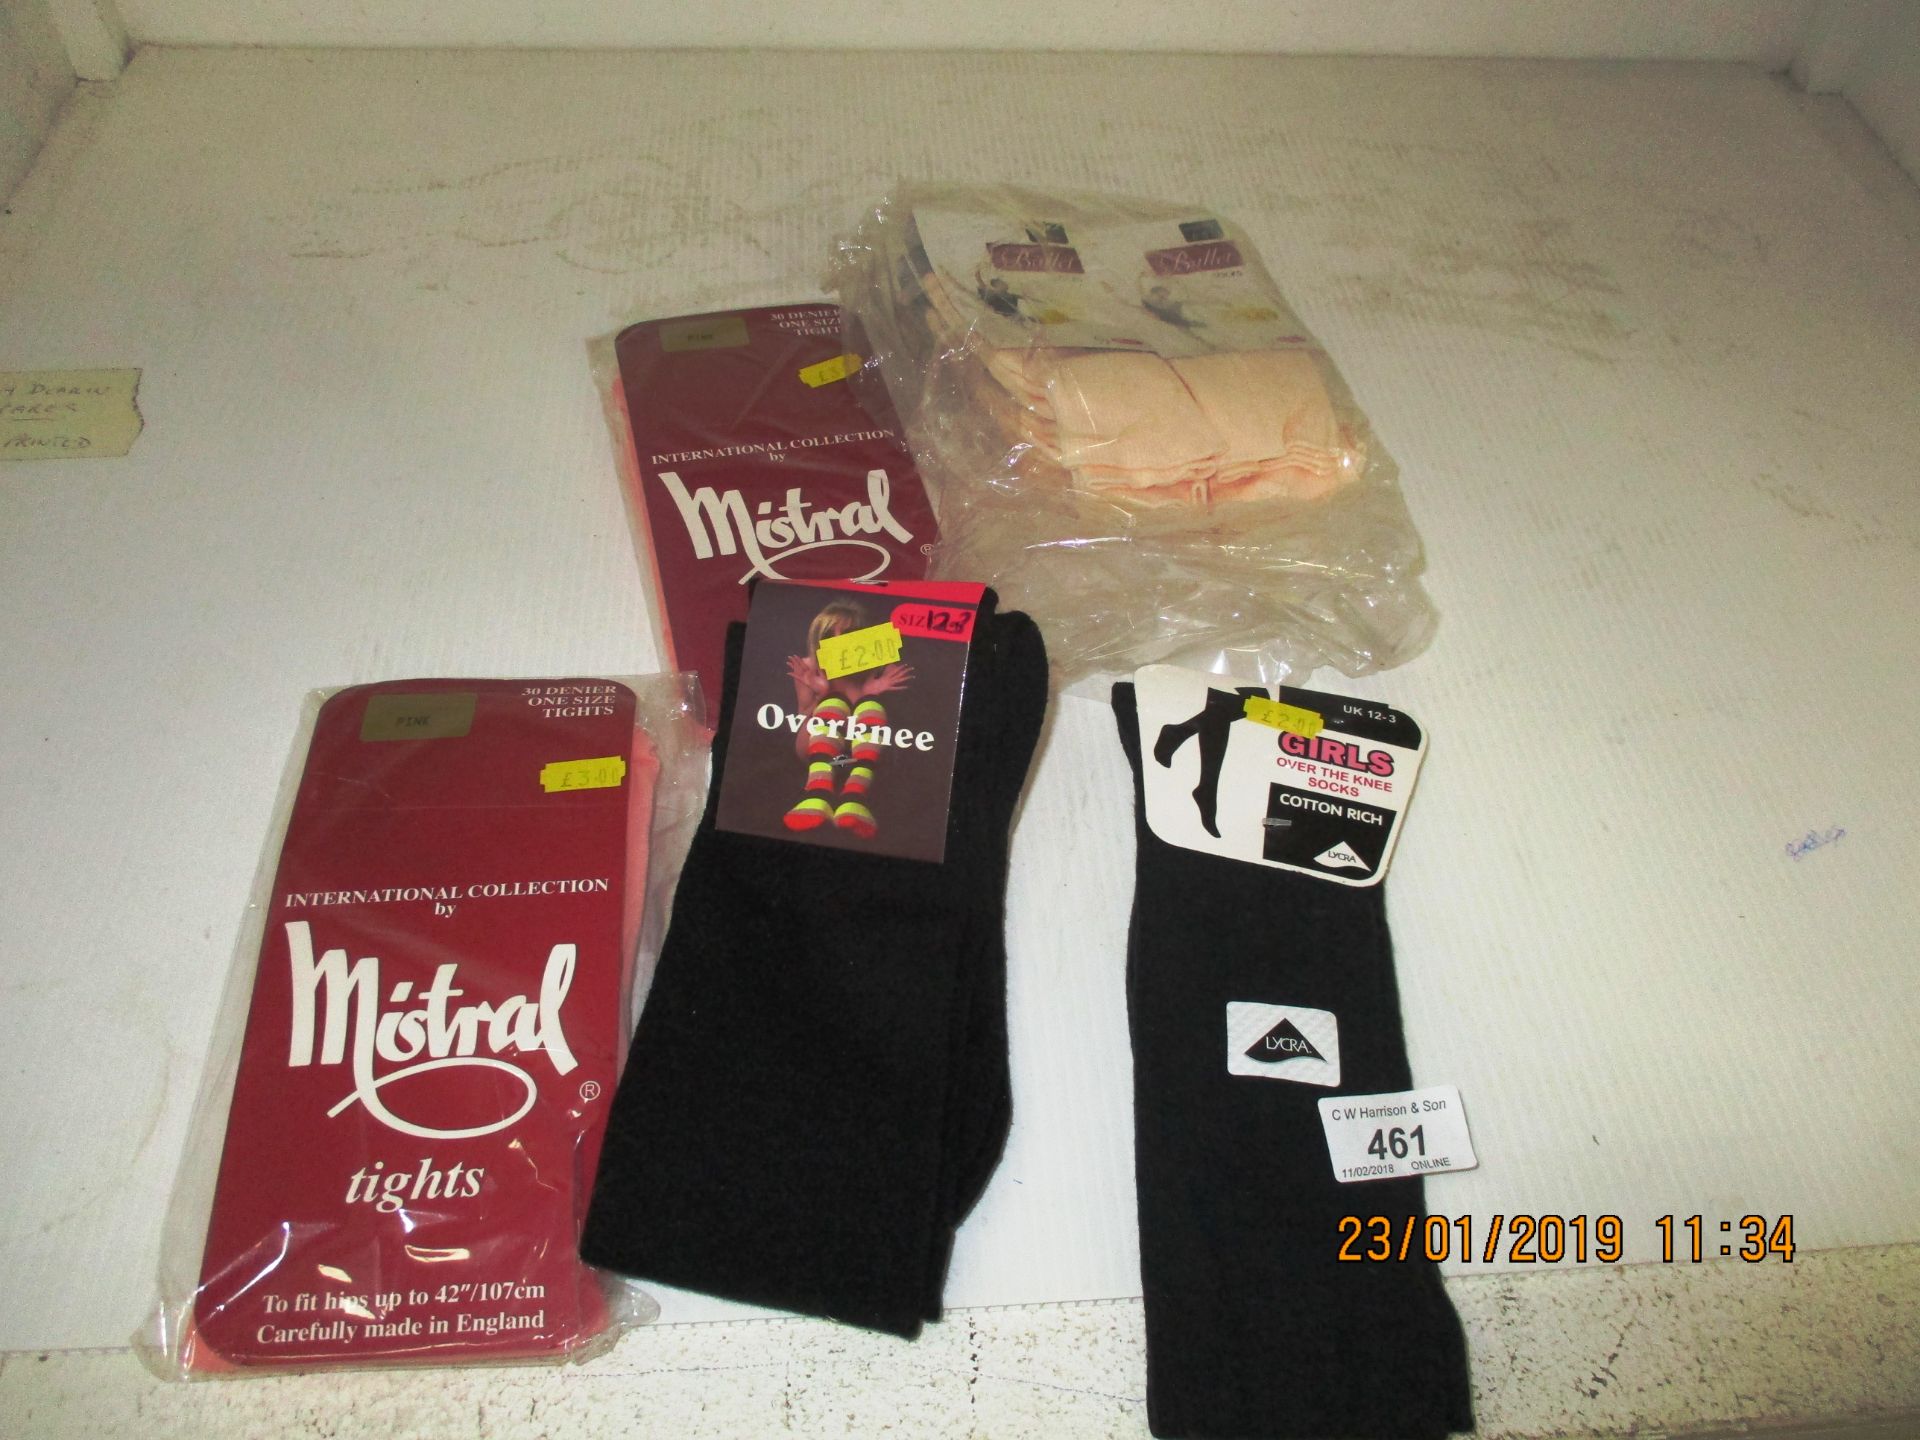 100 x assorted items of clothing - packs of Mistral tights,